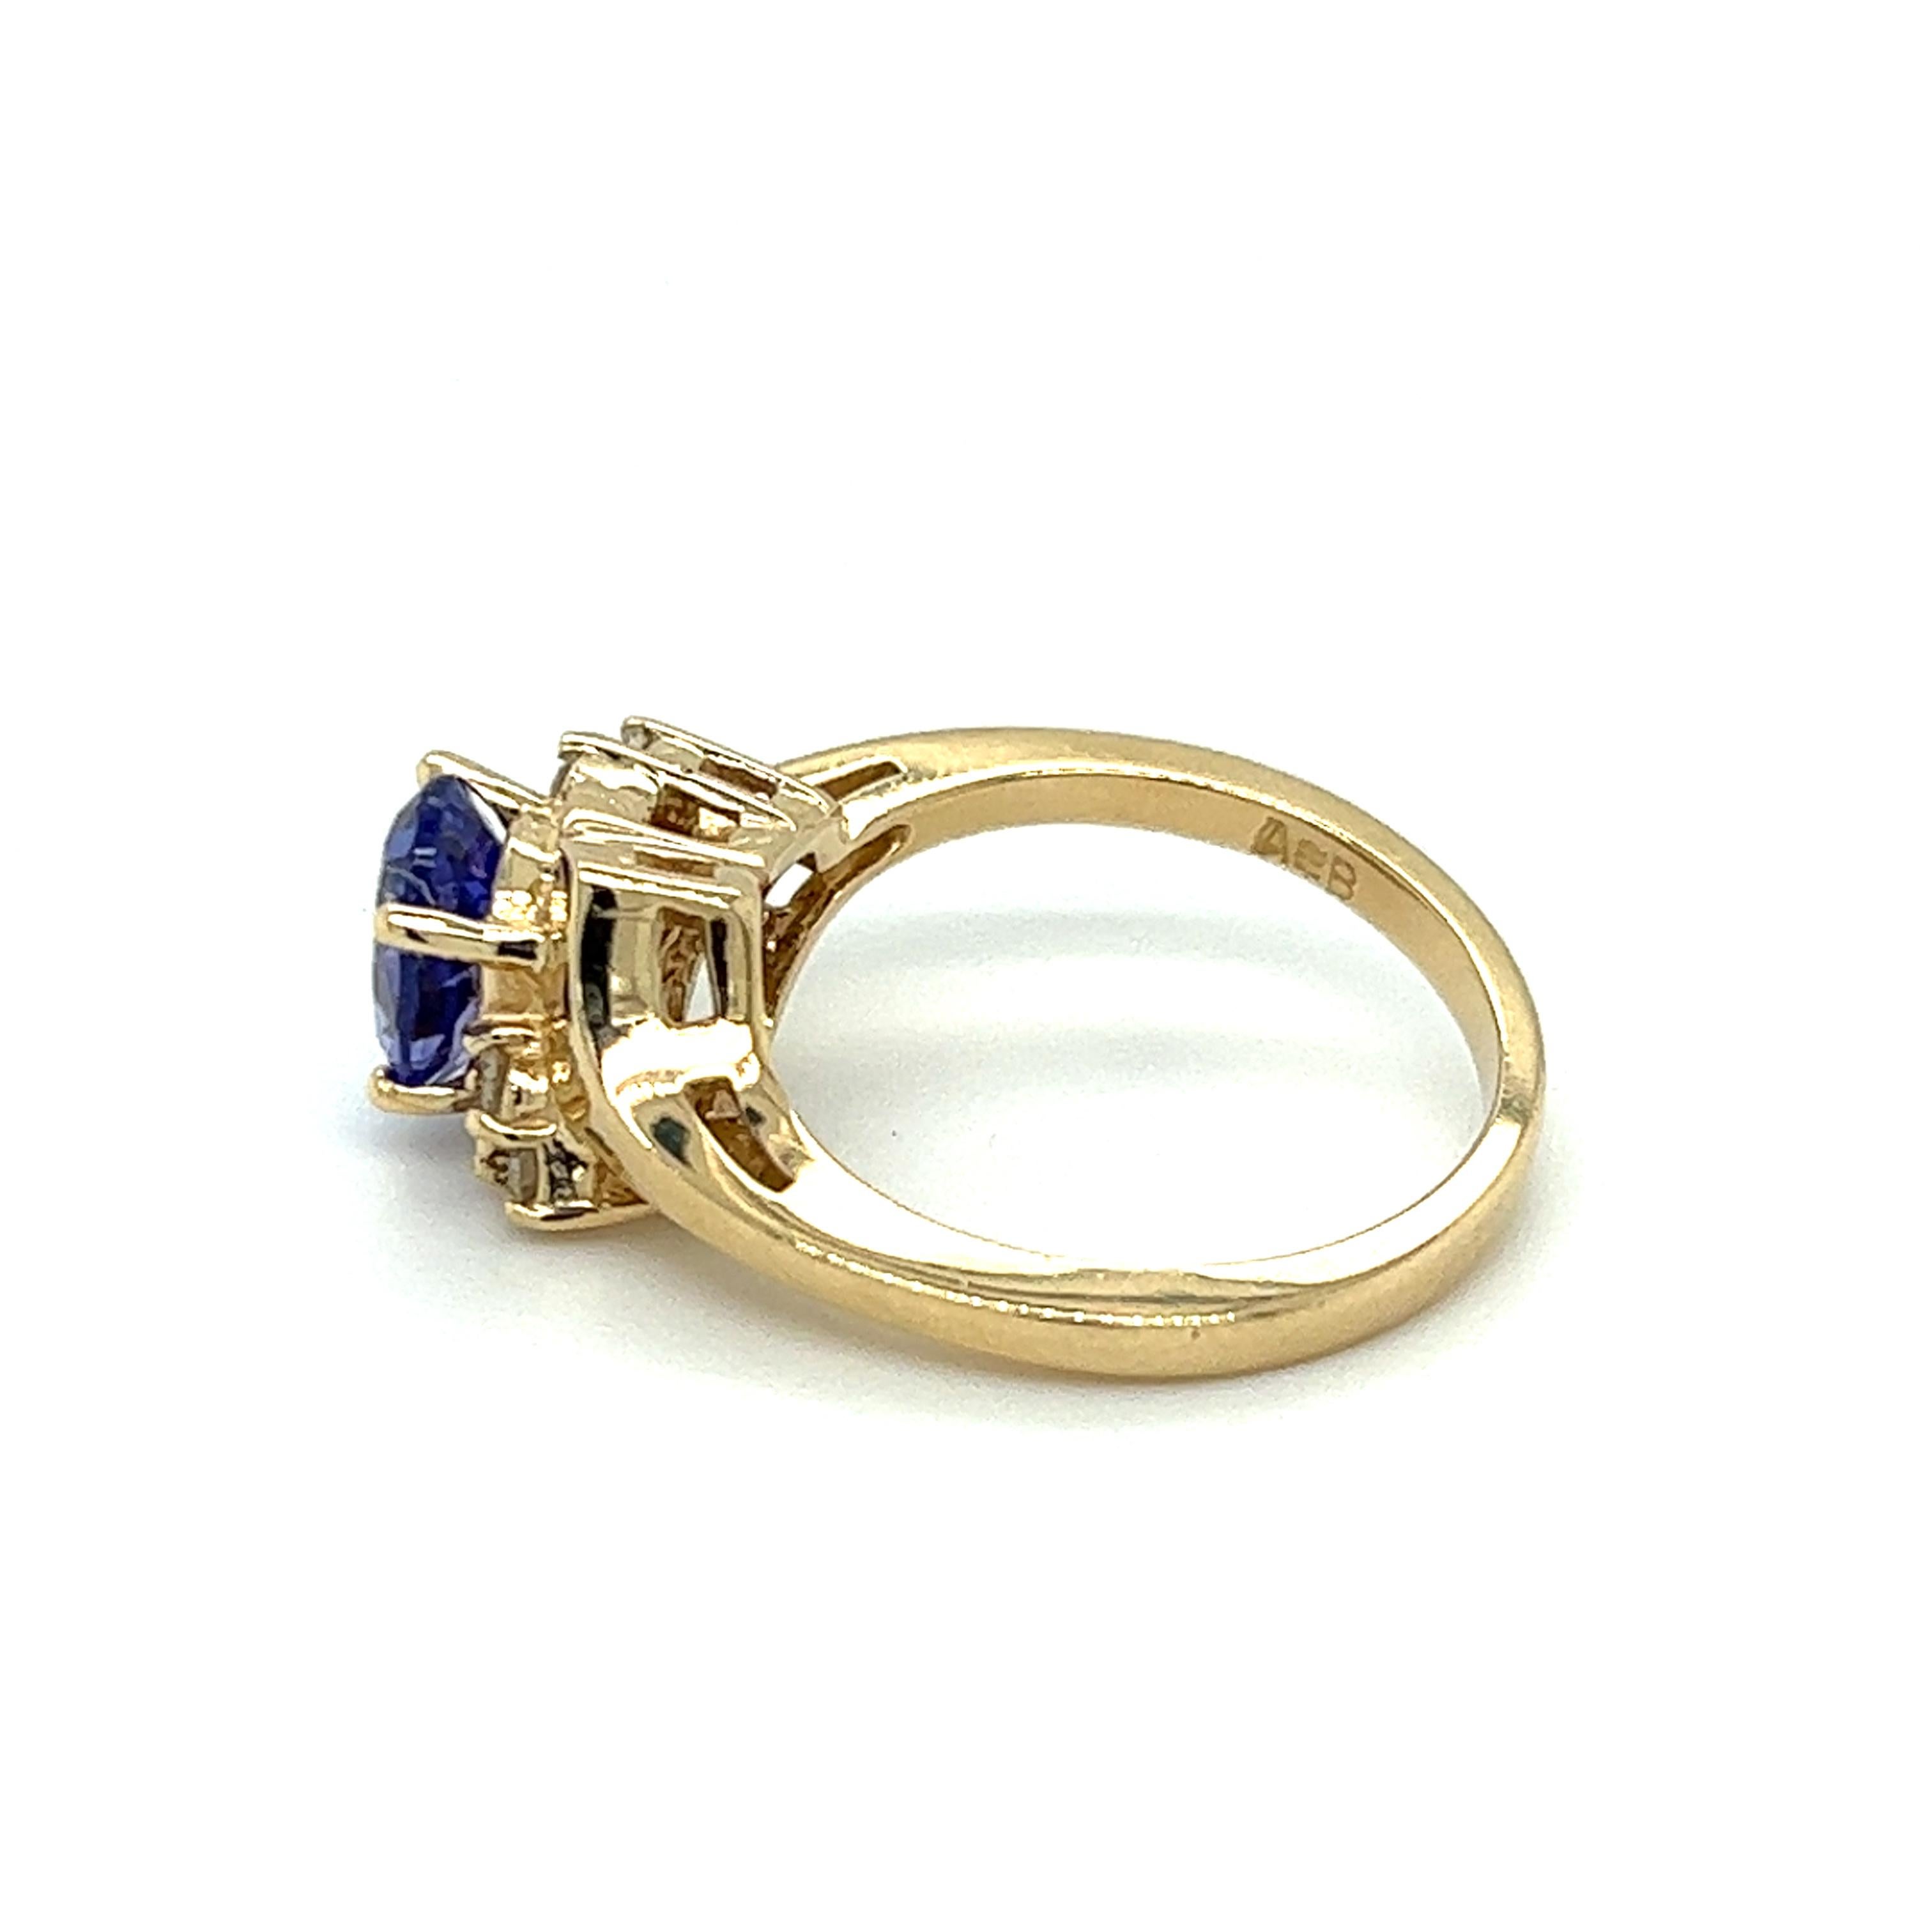 Contemporary Tanzanite & Diamond Bypass Design Ring in 14K Yellow Gold